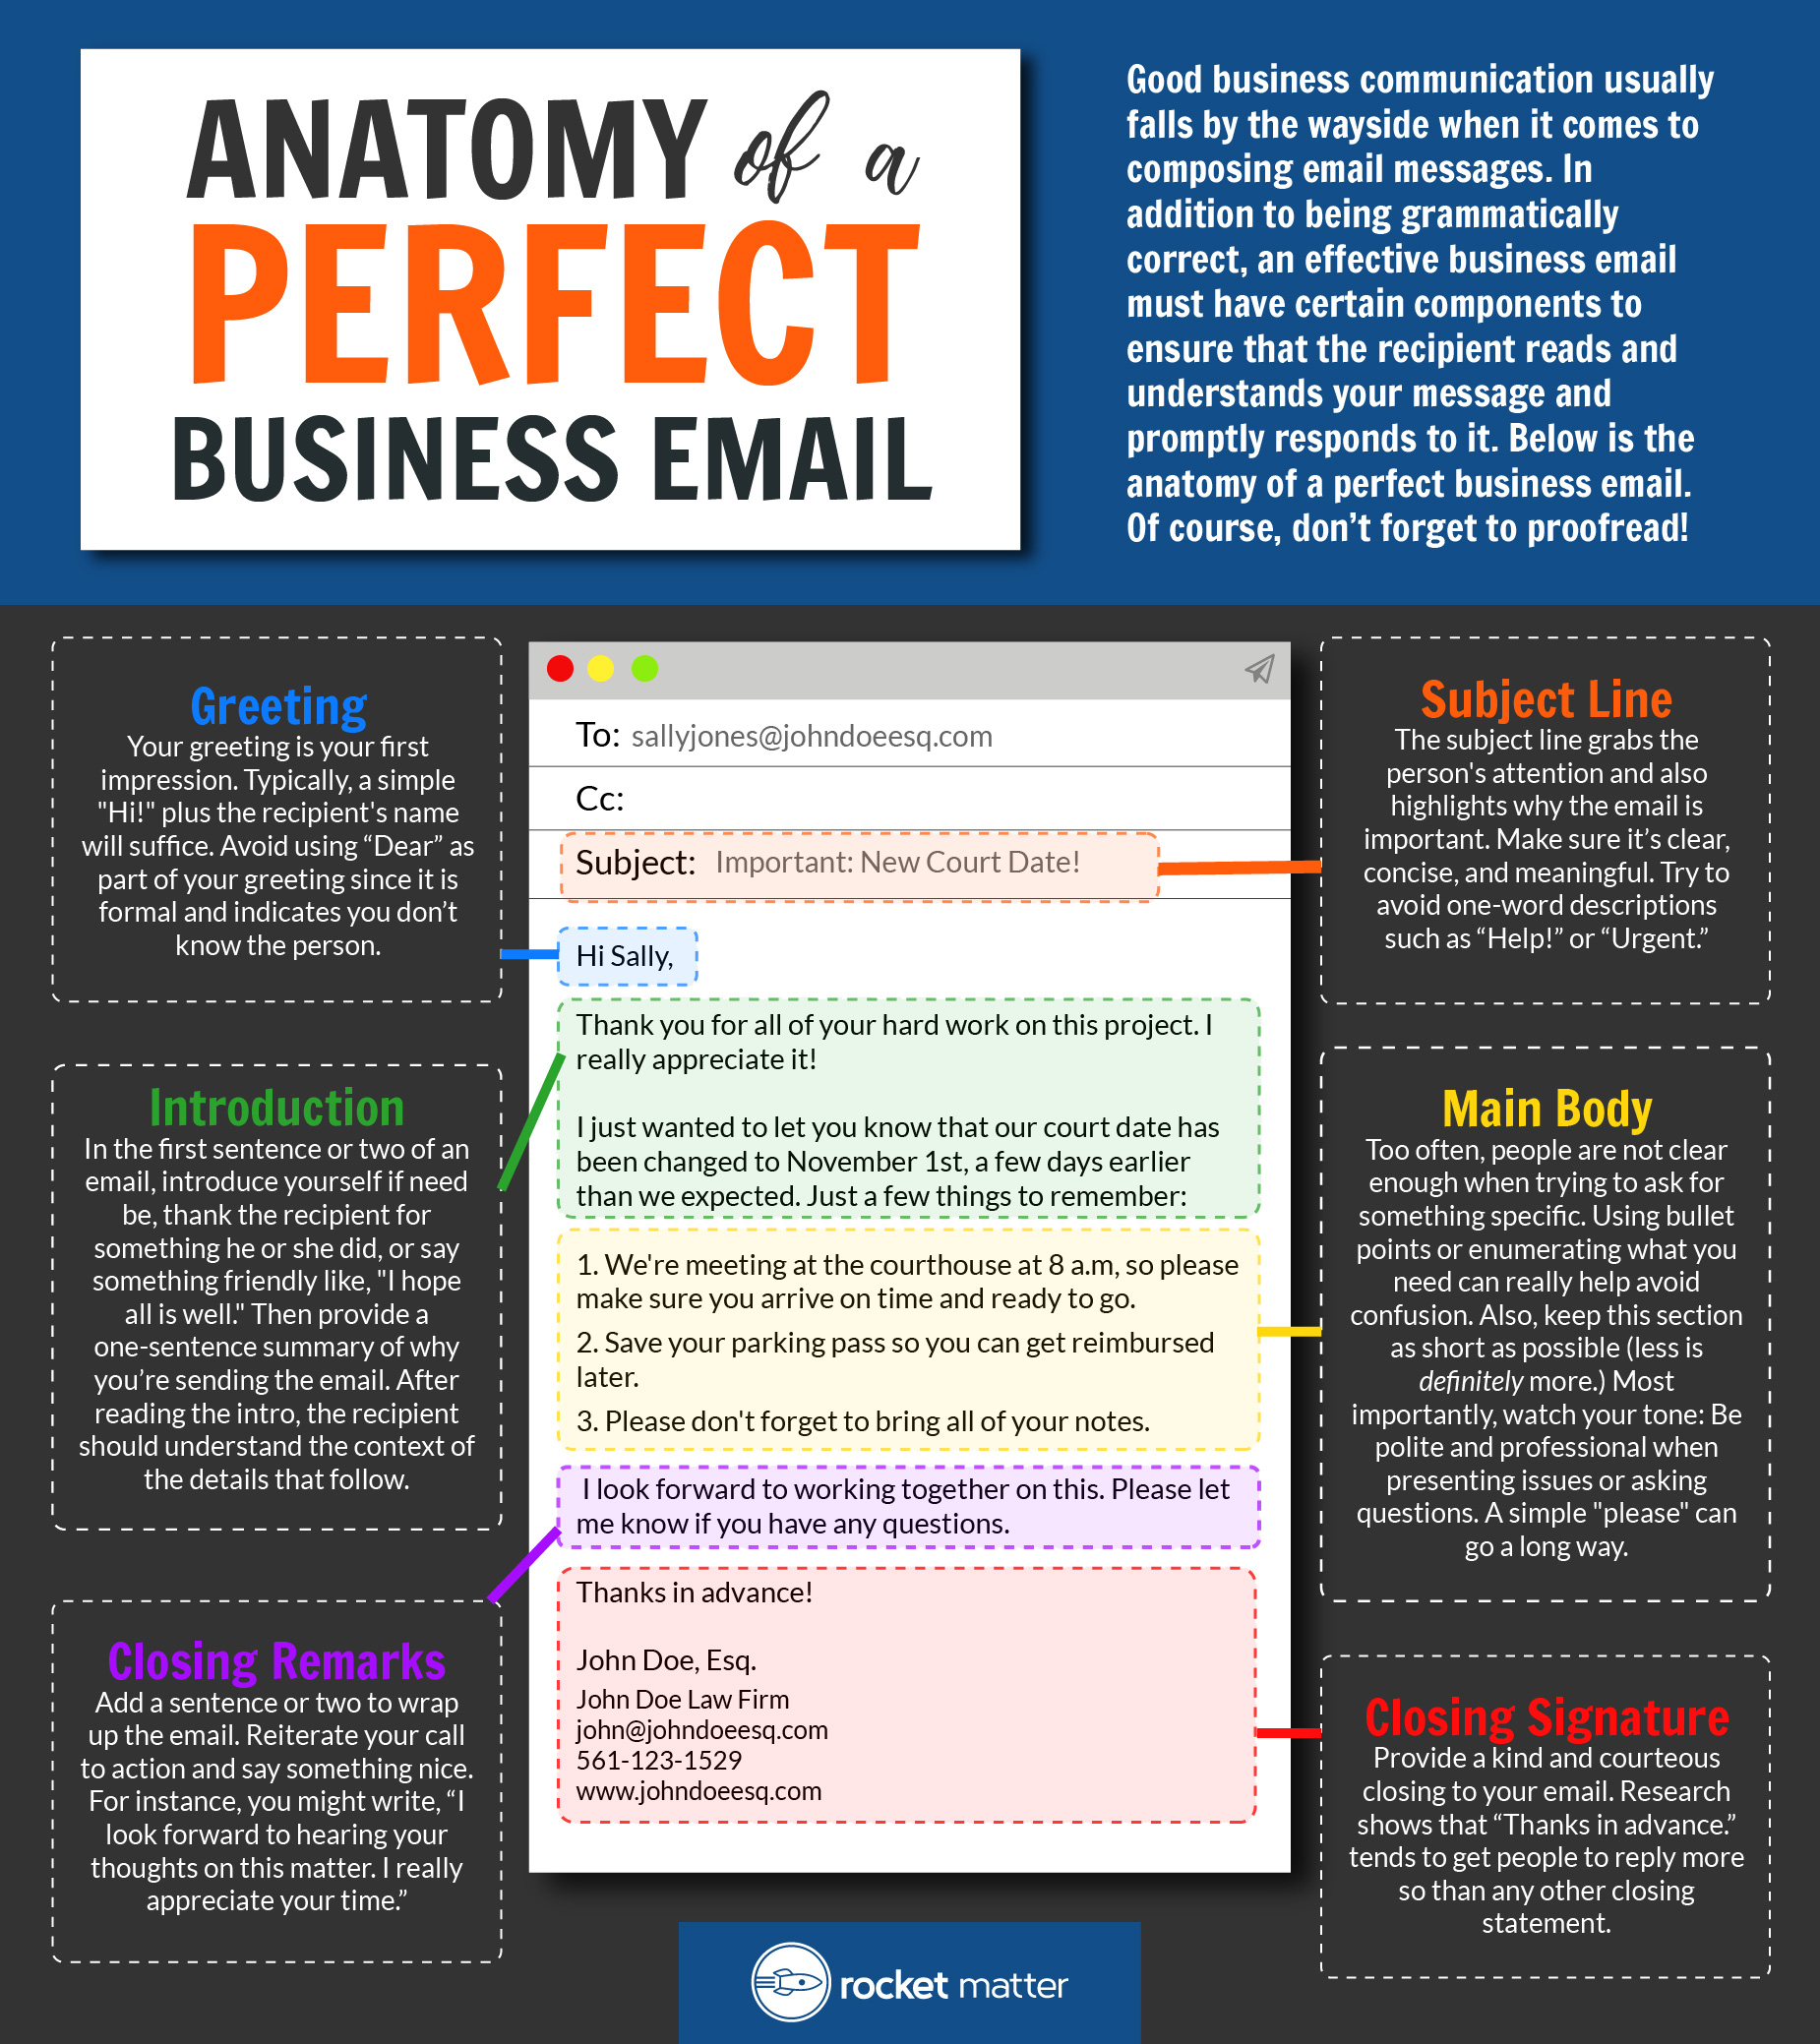 The Anatomy of a Perfect Business Email